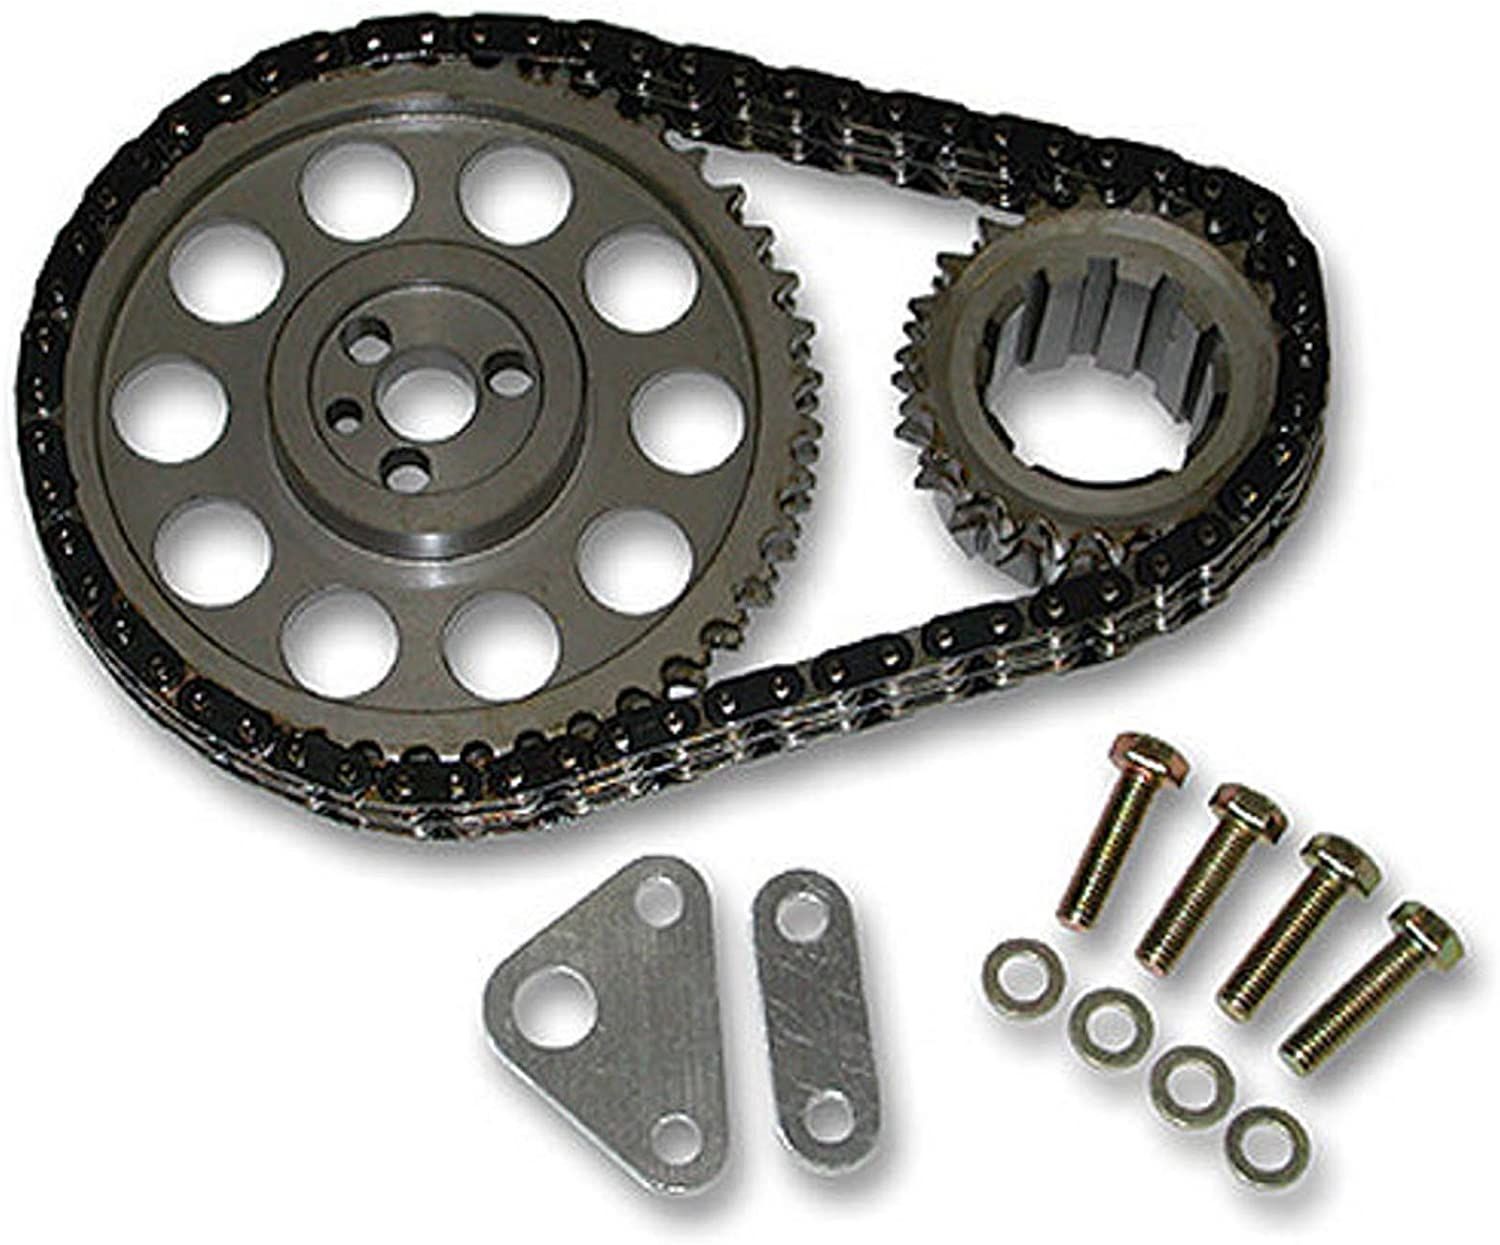 LS1 double roller timing chain SLP 55000